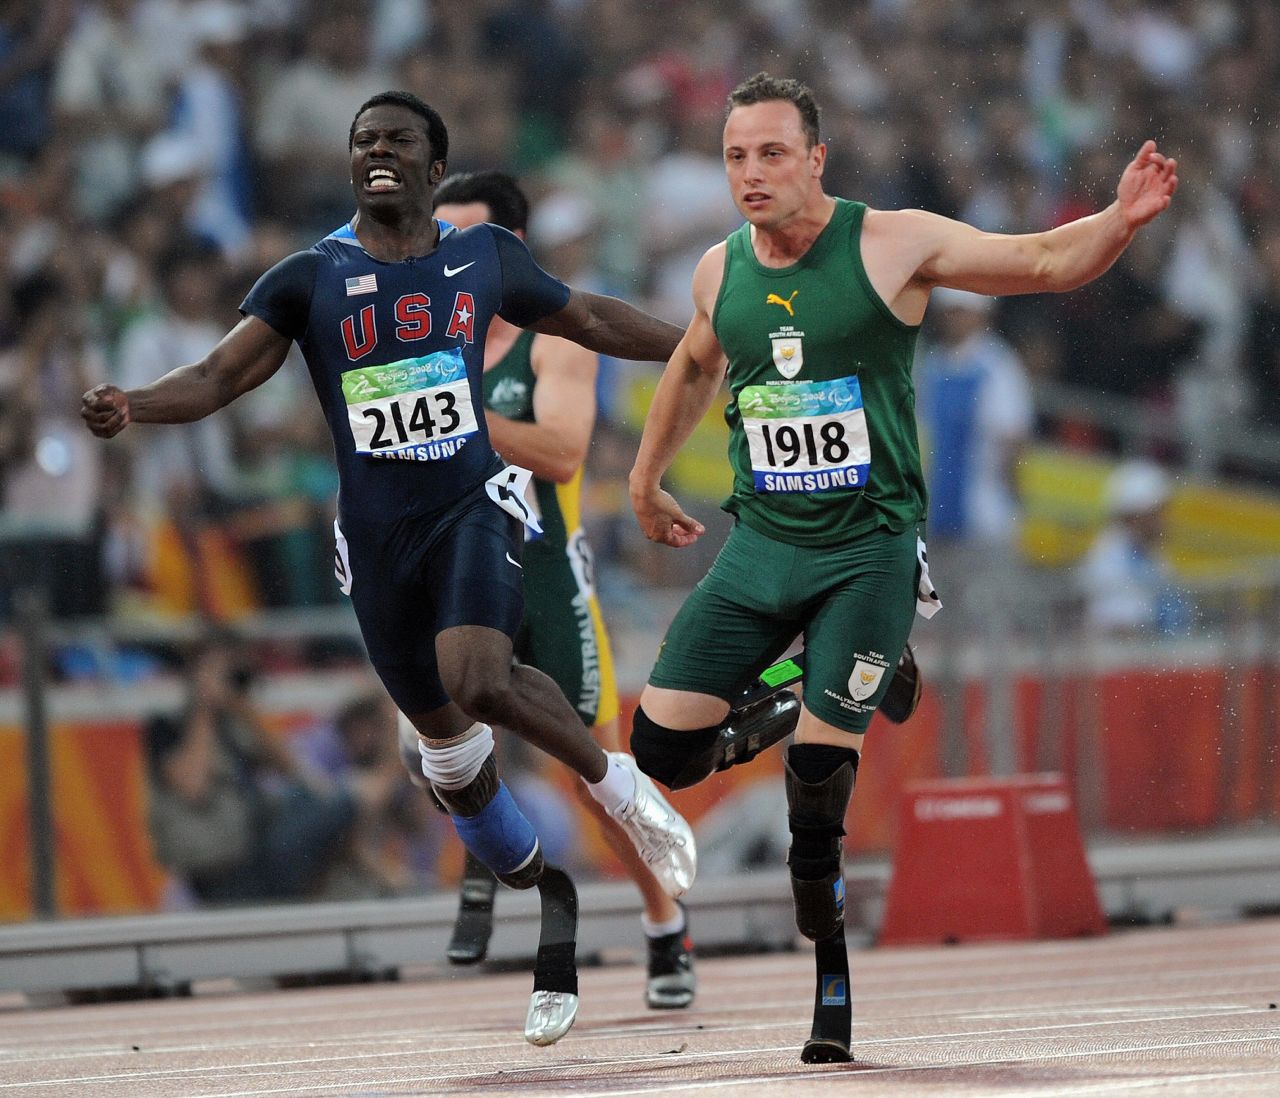 Pistorius held off Jerome Singleton of the United States to win gold over 100m in the T44 class at the 2008 Beijing Paralympics. He also won the 200 and 400m events in the Chinese capital.